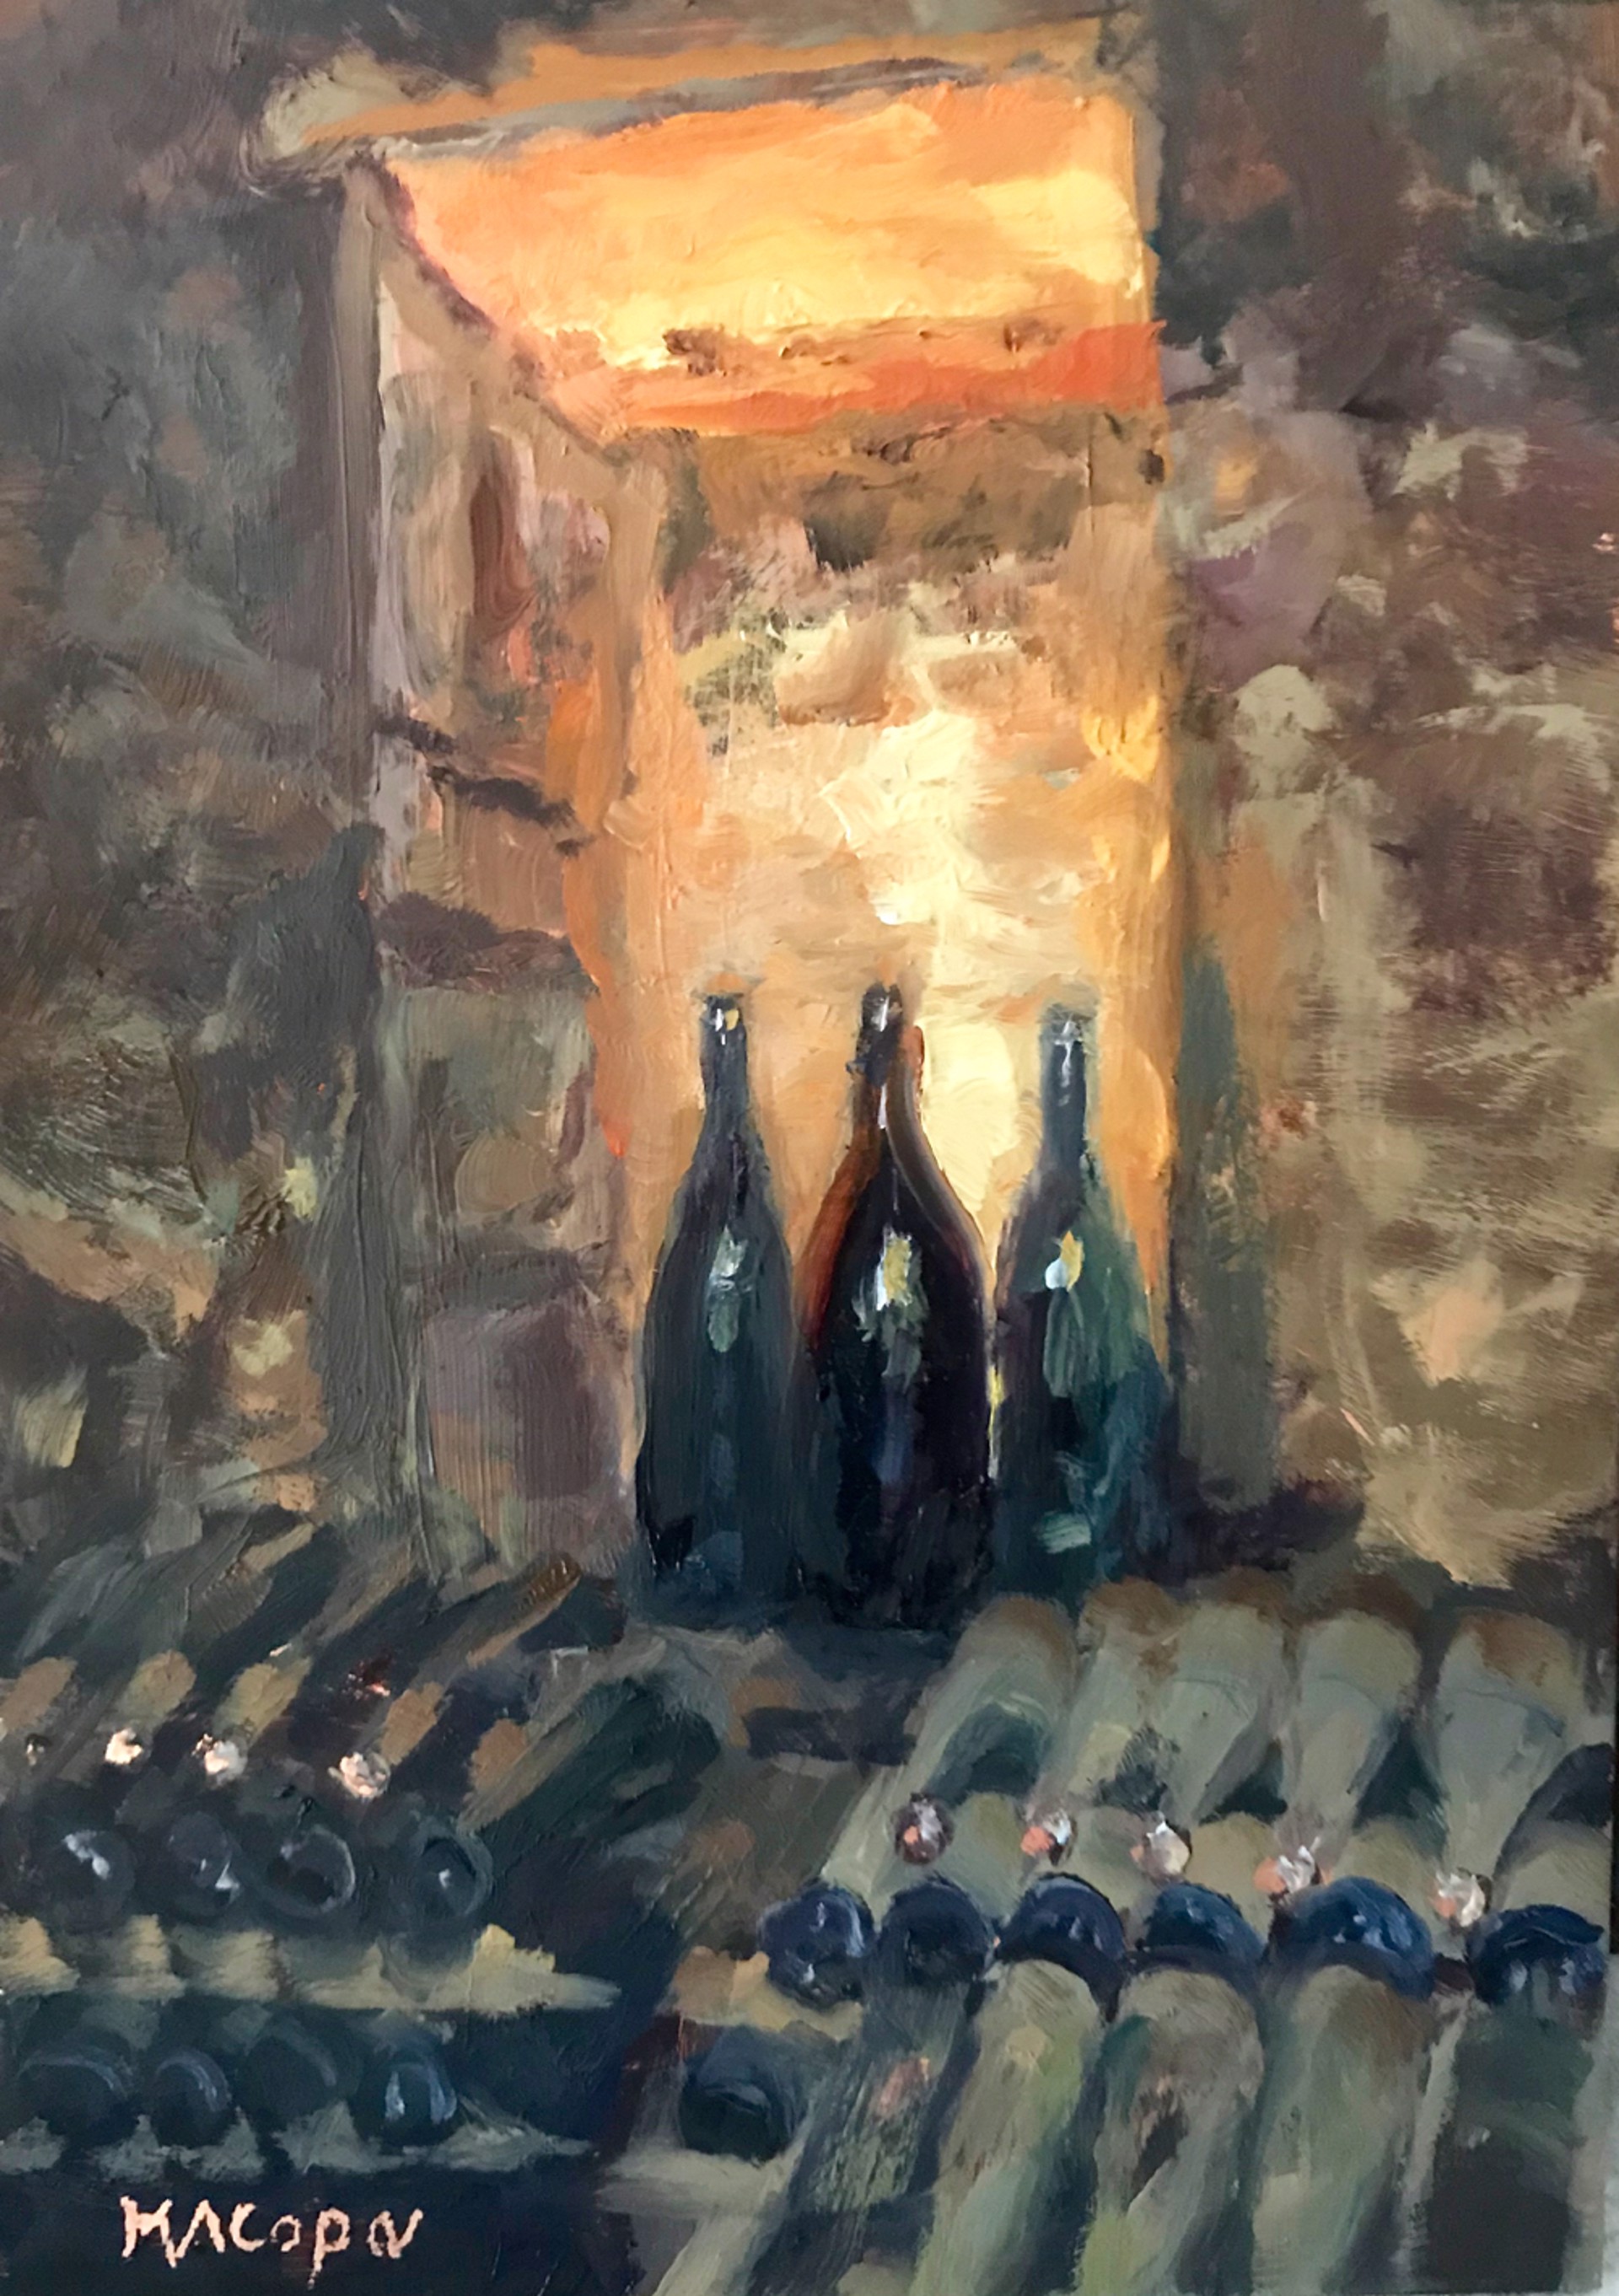 "Cellaring" original oil painting by Mary Ann Cope